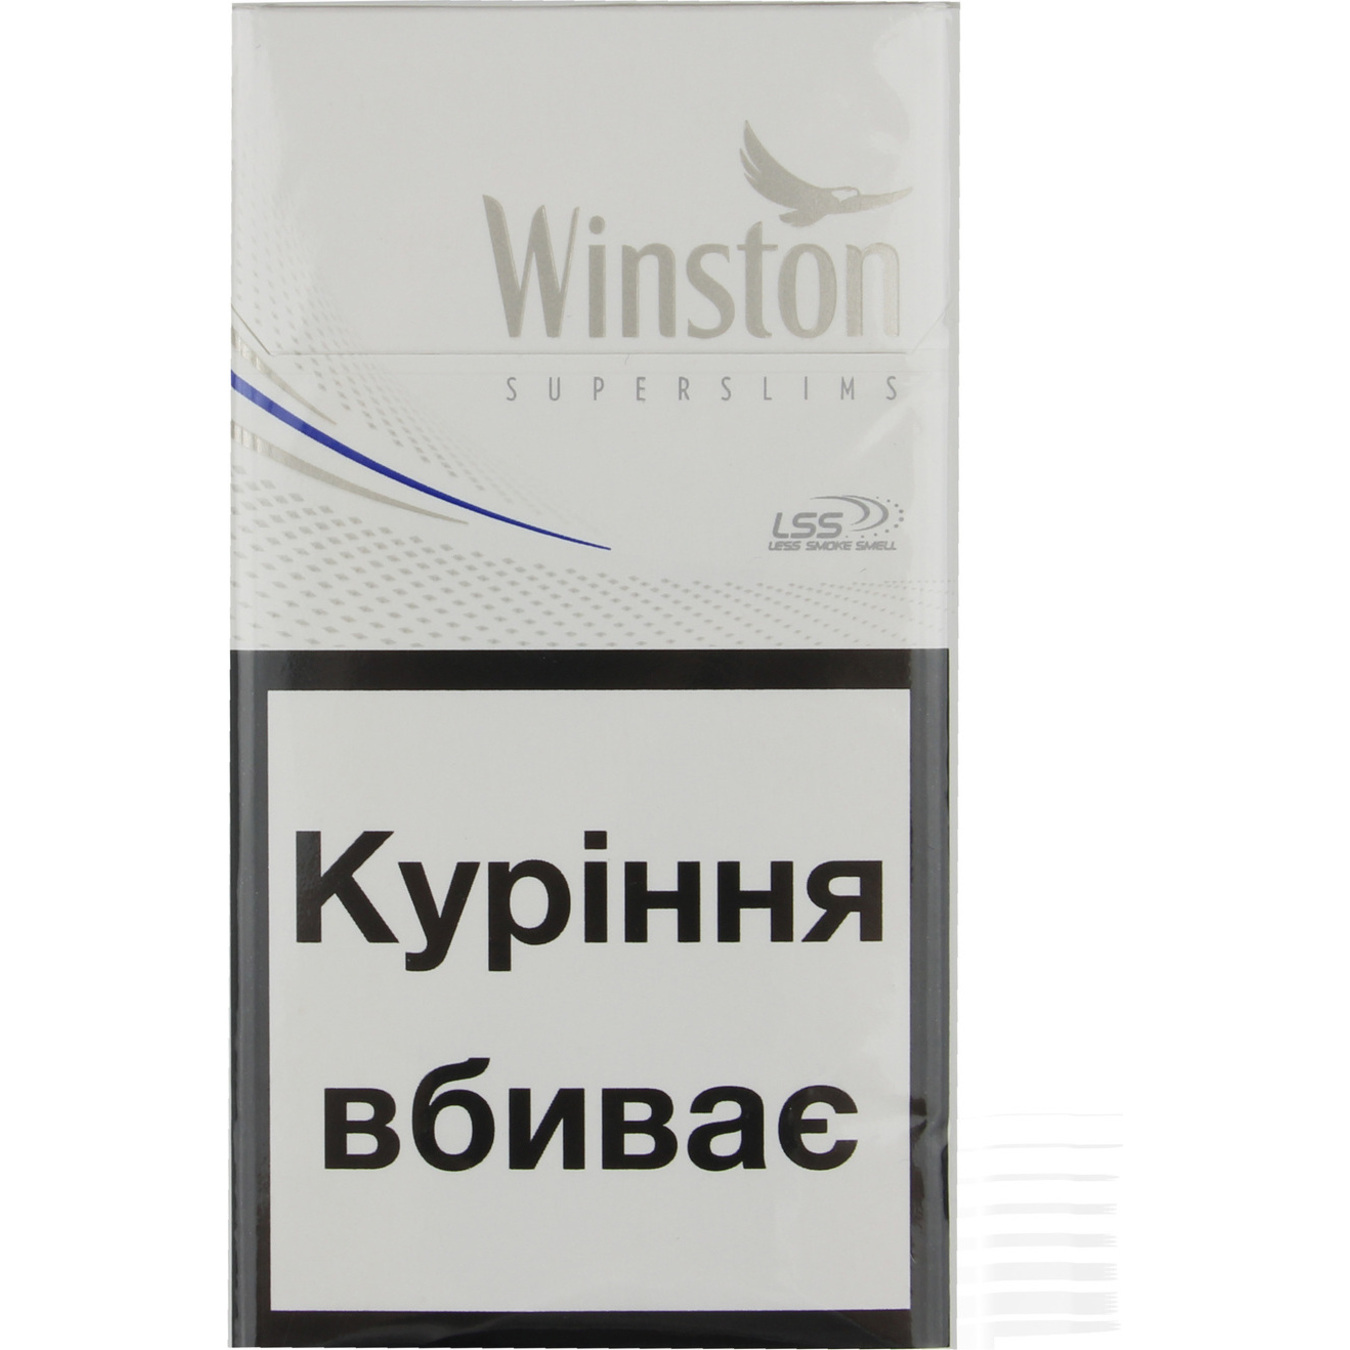 Winston Silver Slims Cigarettes (the price is indicated without excise tax)